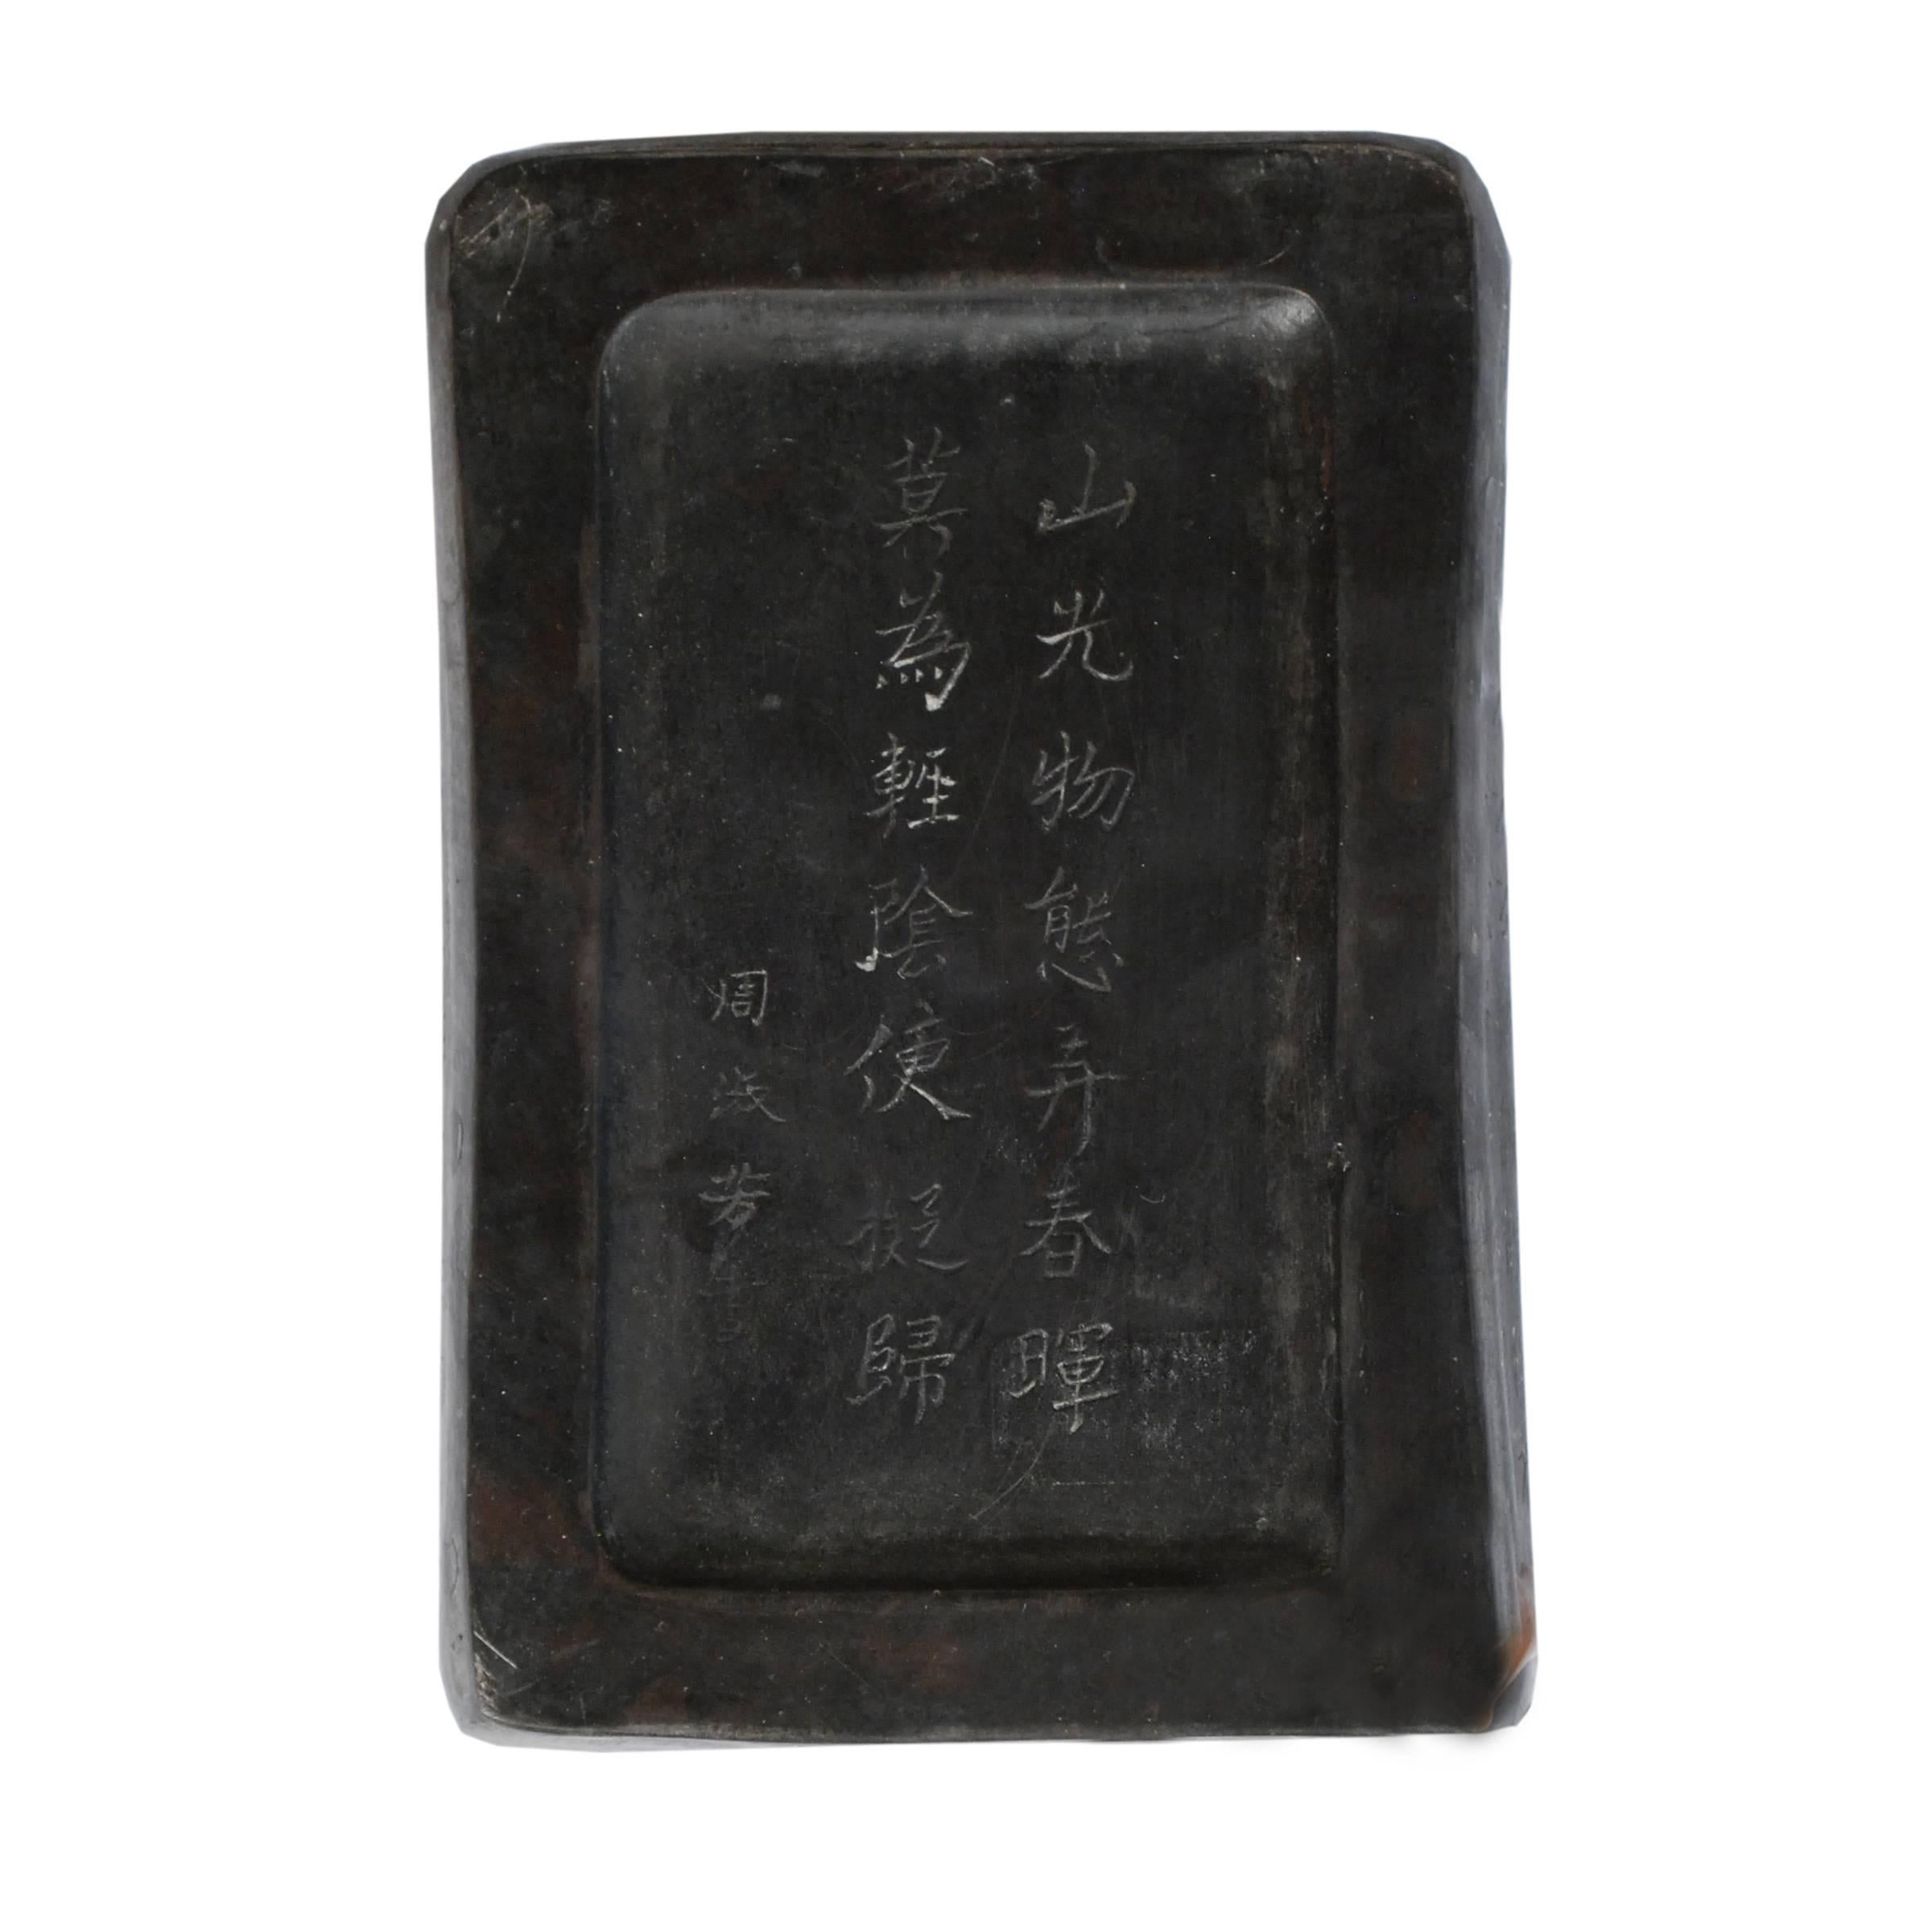 Inkstones were used by a venerable scholar or artist to saturate calligraphy brushes with ink. This 19th century inkstone is finely carved with a Qilin, a mythical Chinese beast associated with sages and considered an omen of prosperity. It was